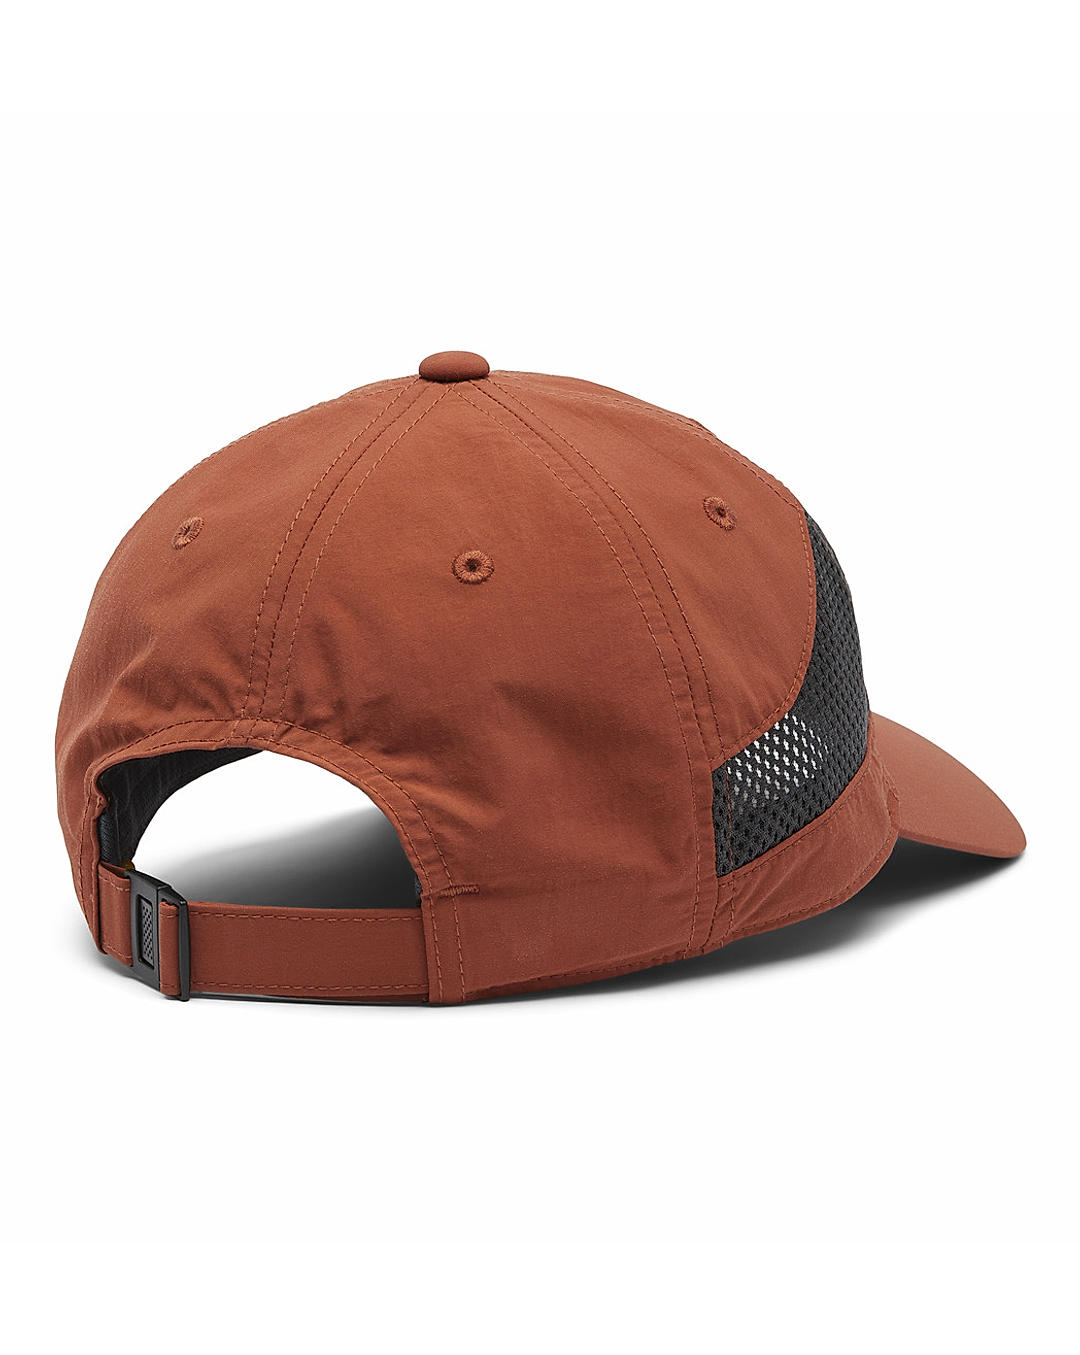 Columbia Unisex Brown Tech Shade Hat